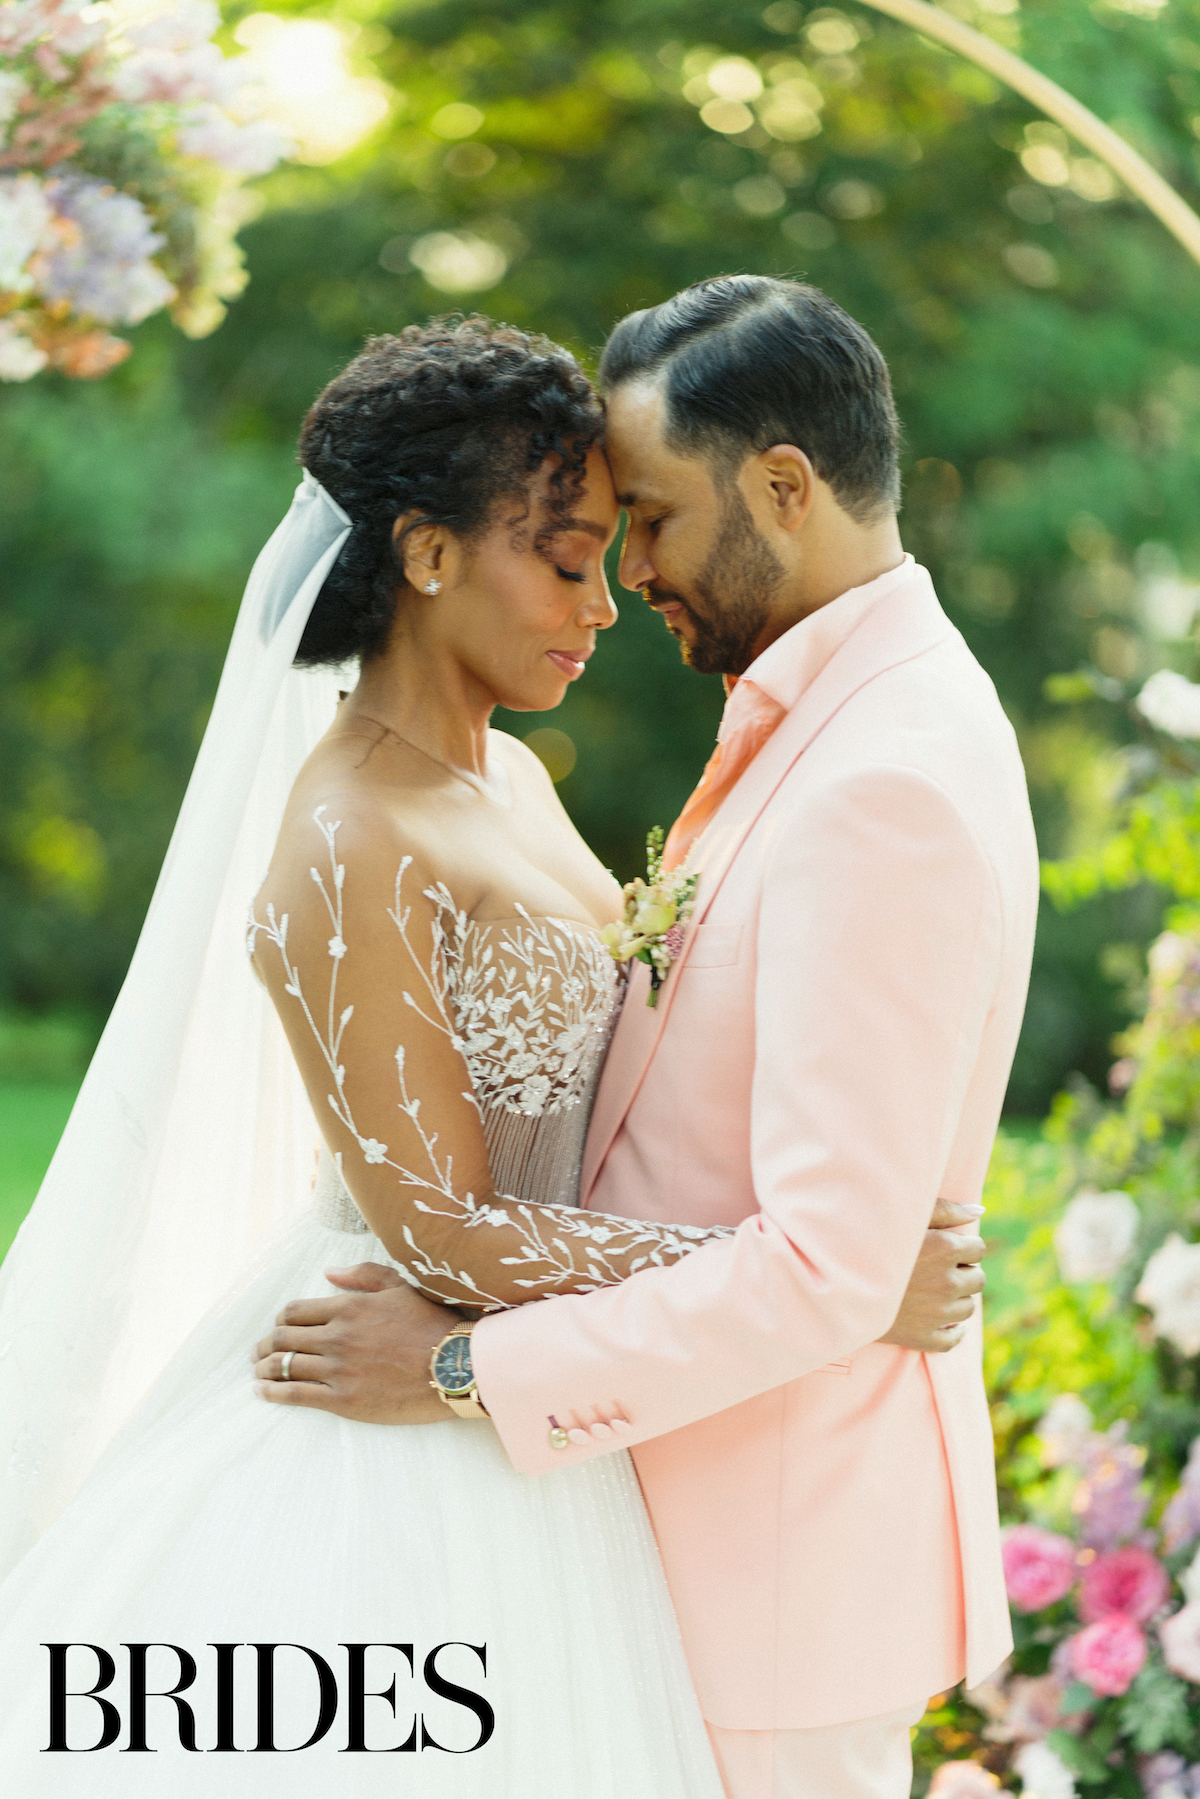 Images from Anika Noni Rose and Jason Dirden's October wedding